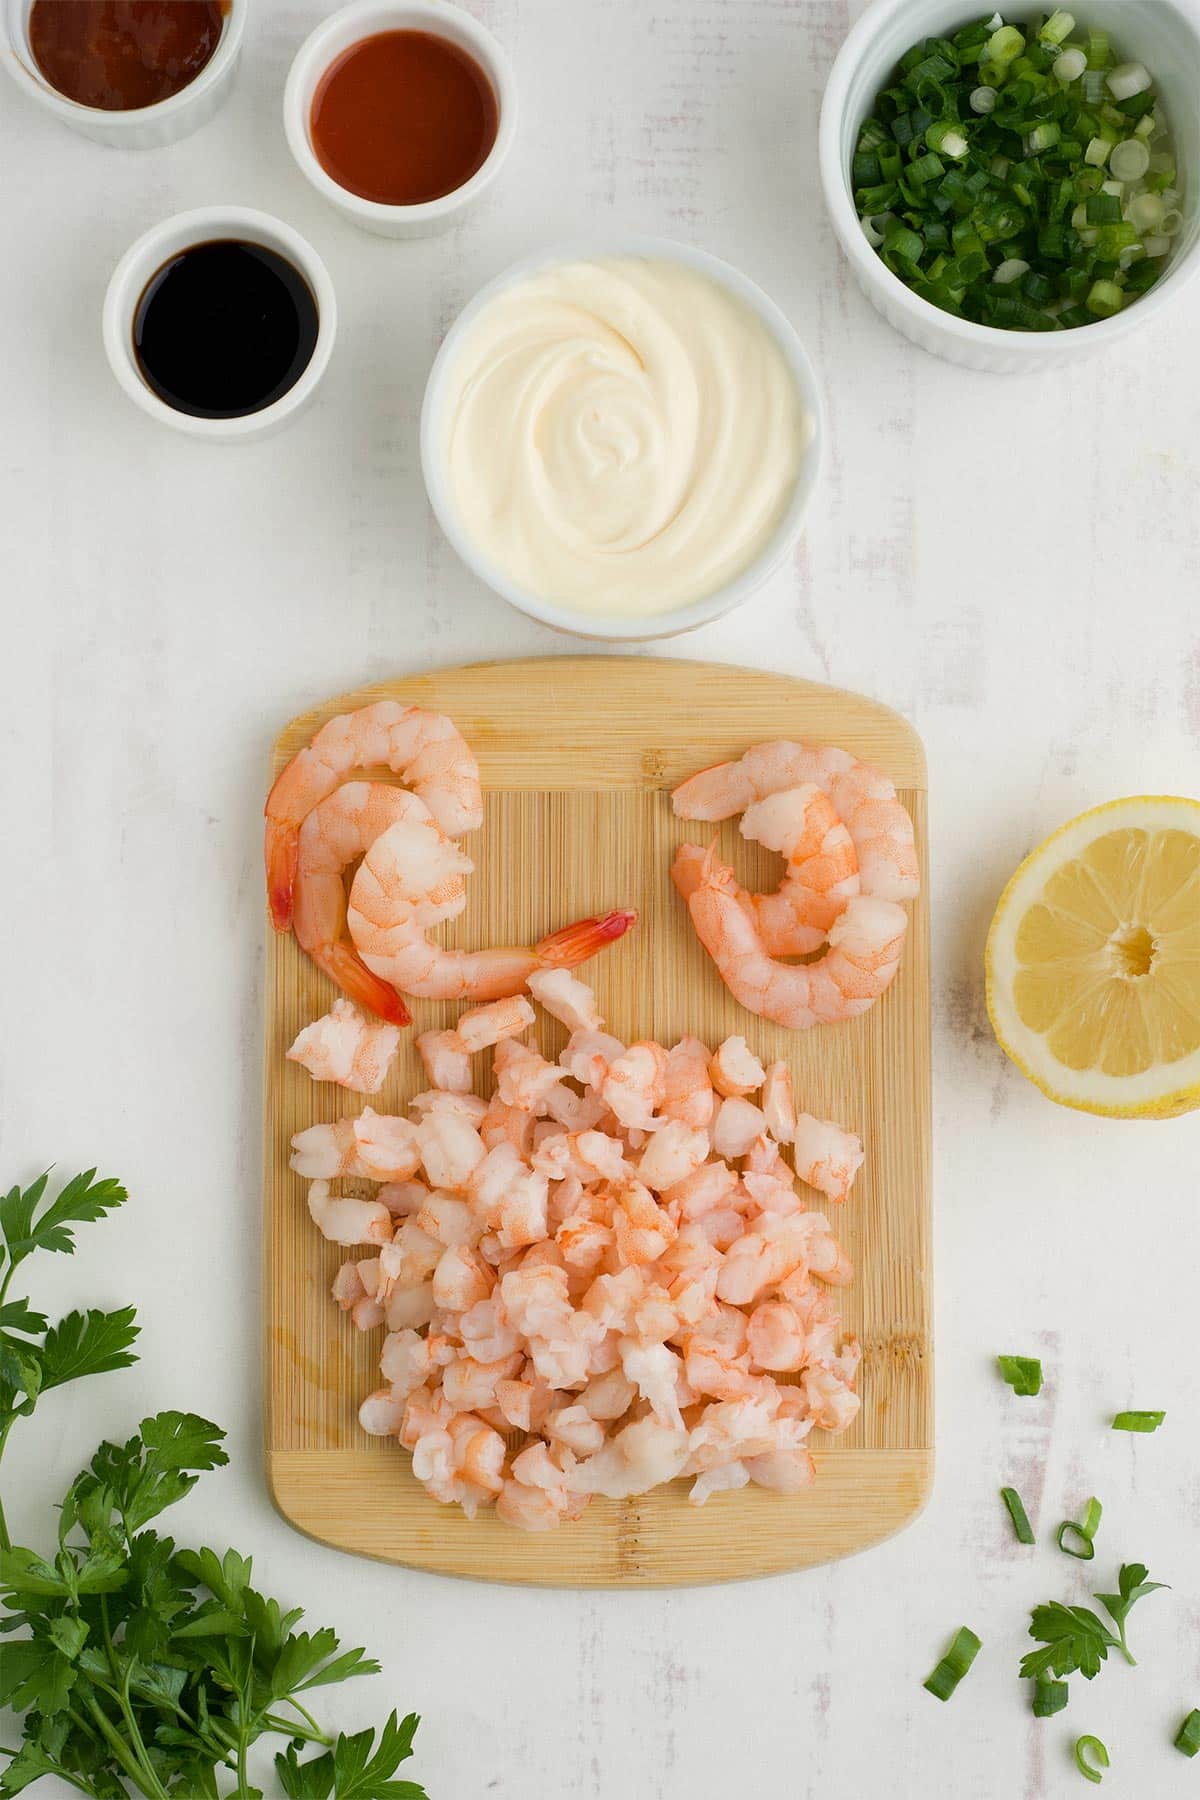 Shrimp cut up into little pieces on a small cutting board.